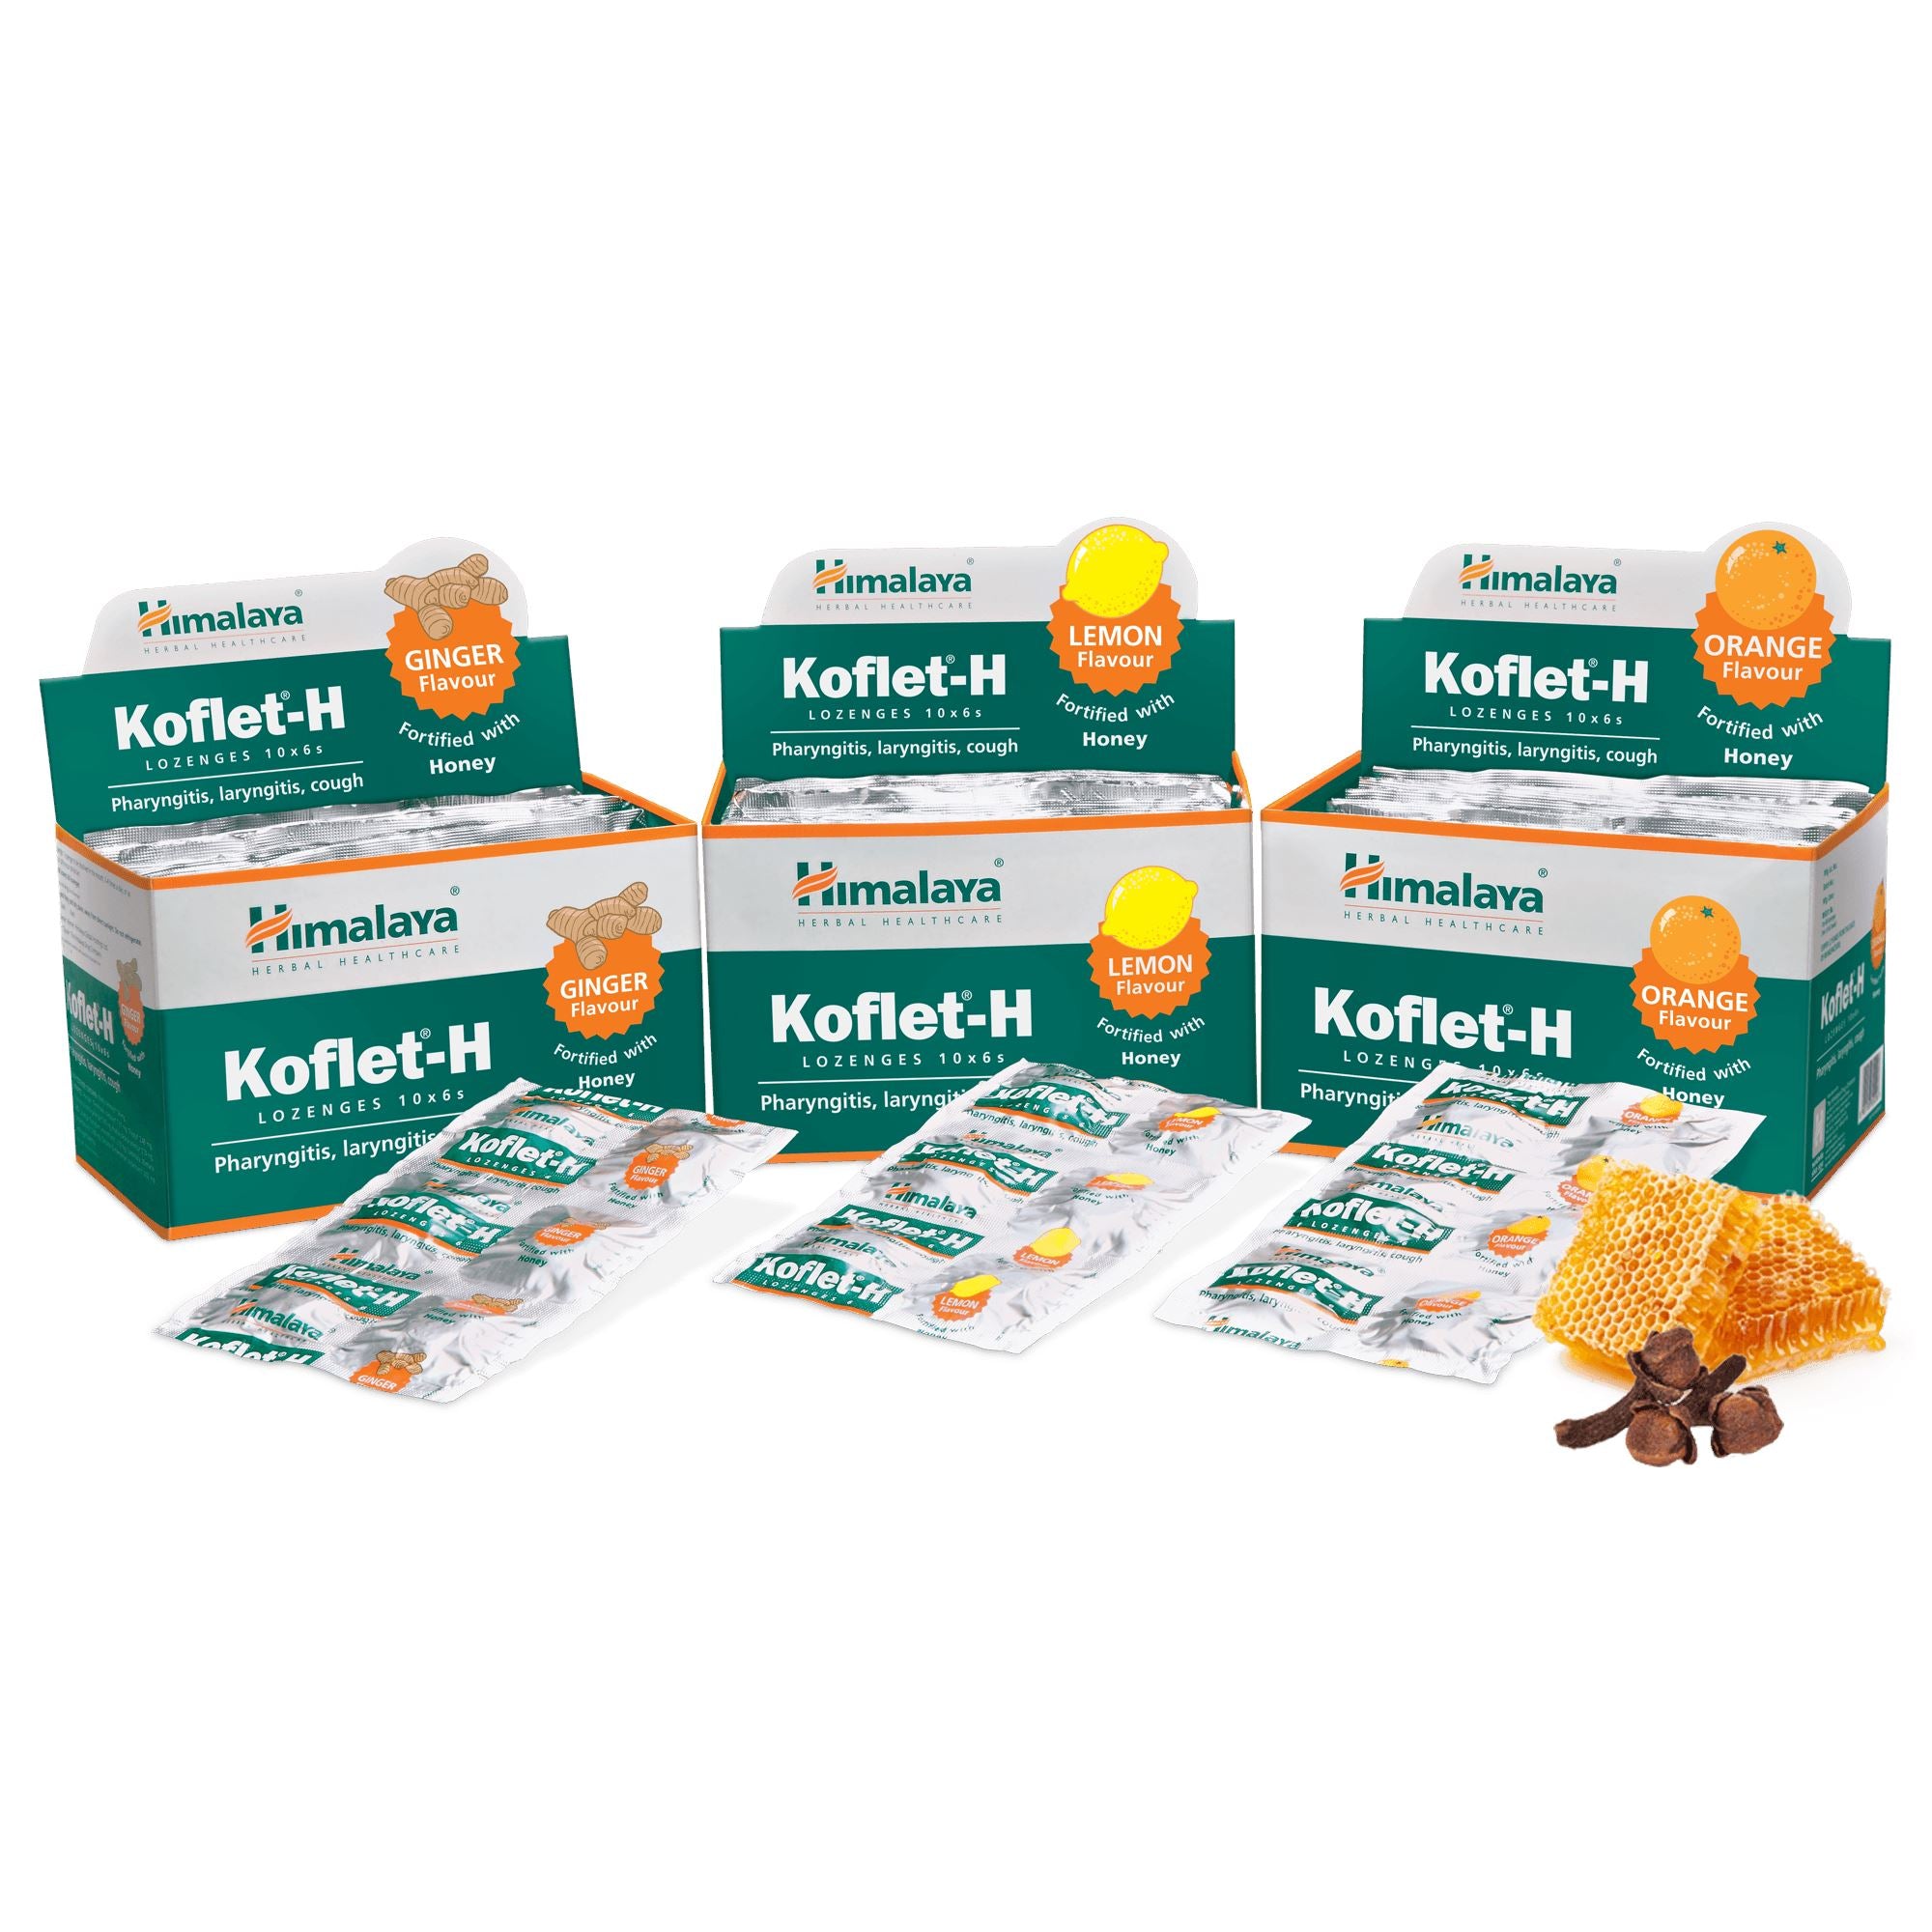 Himalaya Koflet H Lozenges - Helps relieve cough, sore throat and quickly relieves throat irritation